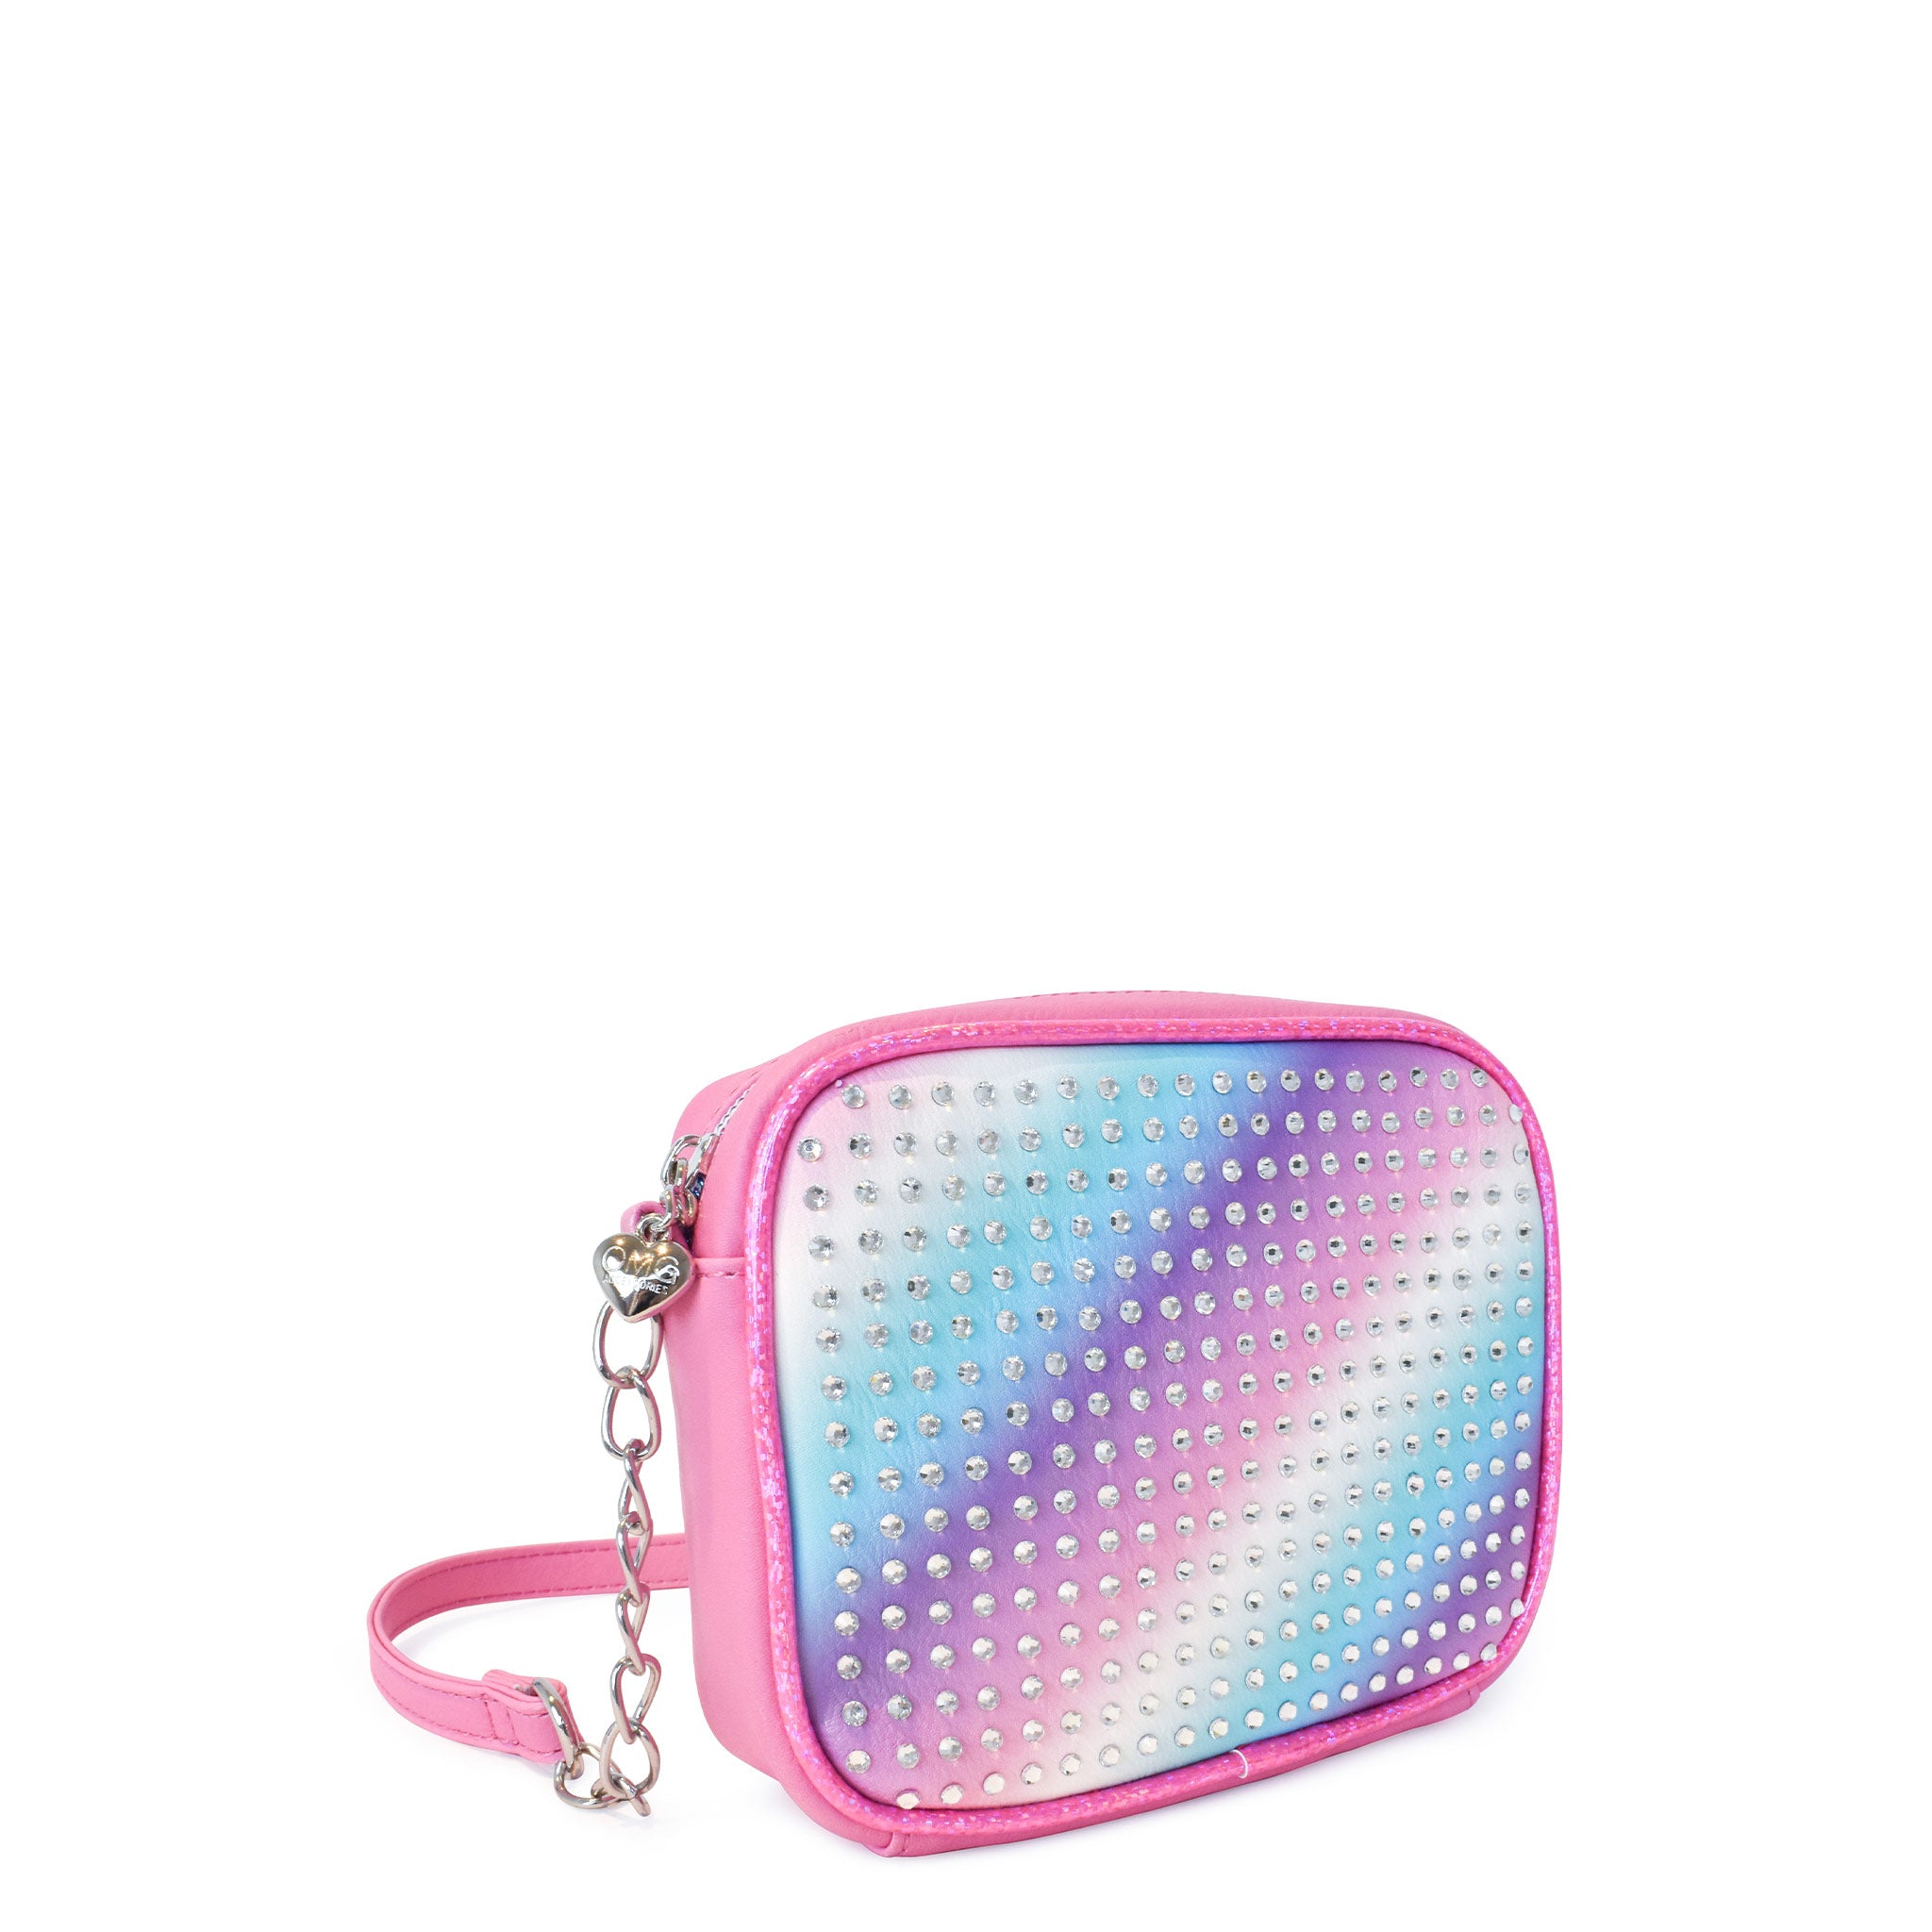 Side view of a cool pastel ombre crossbody covered in rhinestones